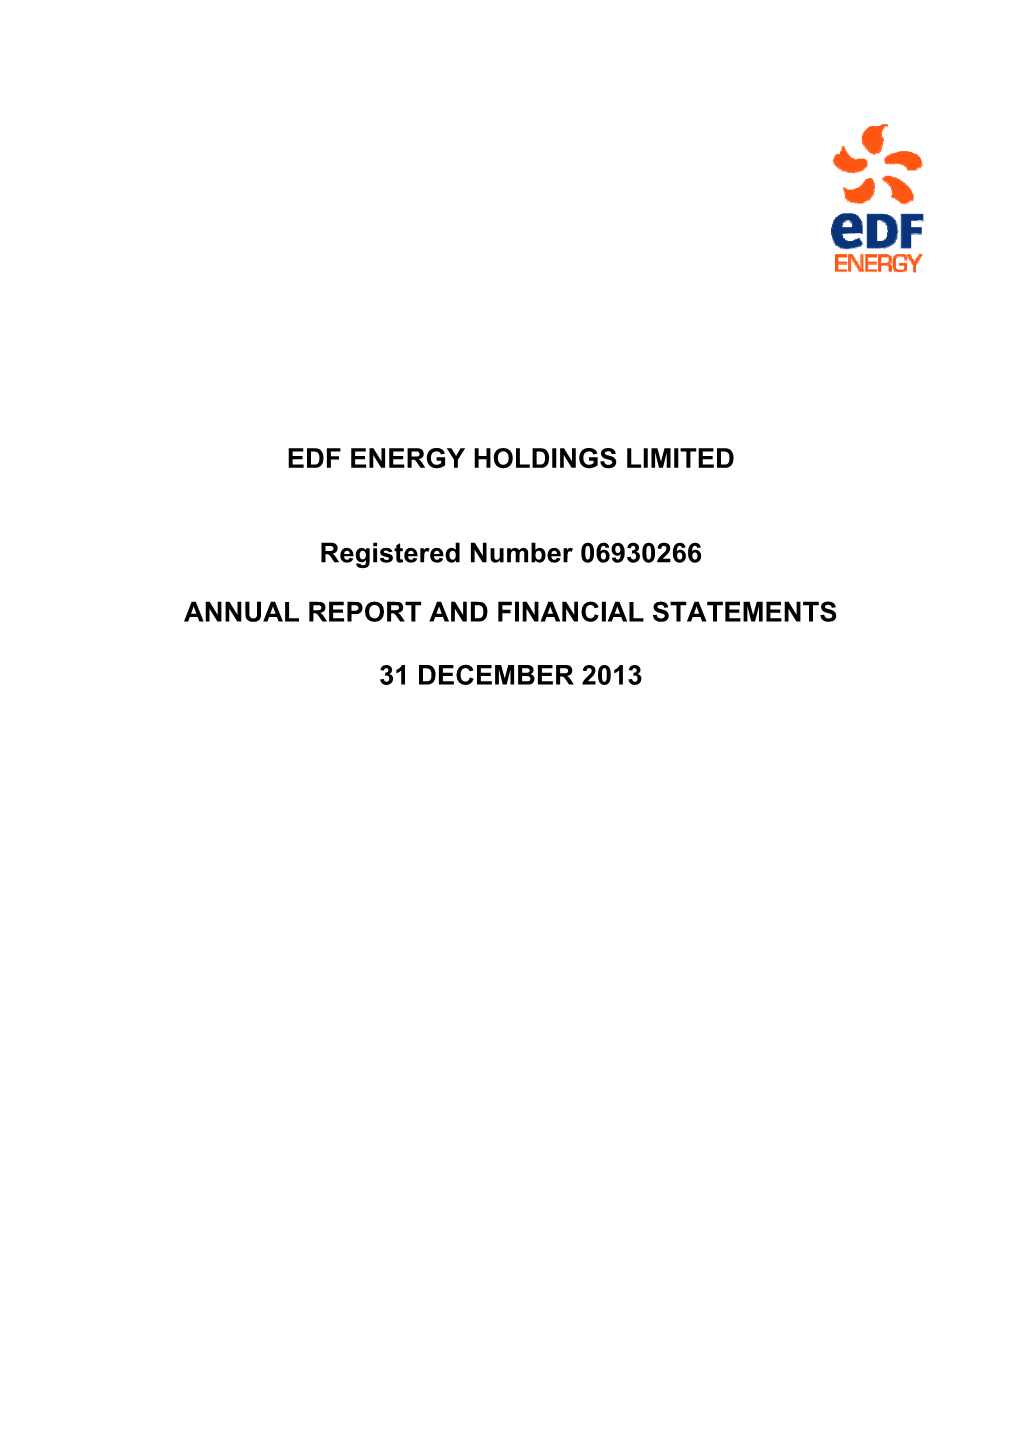 EDF ENERGY HOLDINGS LIMITED Registered Number 06930266 ANNUAL REPORT and FINANCIAL STATEMENTS 31 DECEMBER 2013